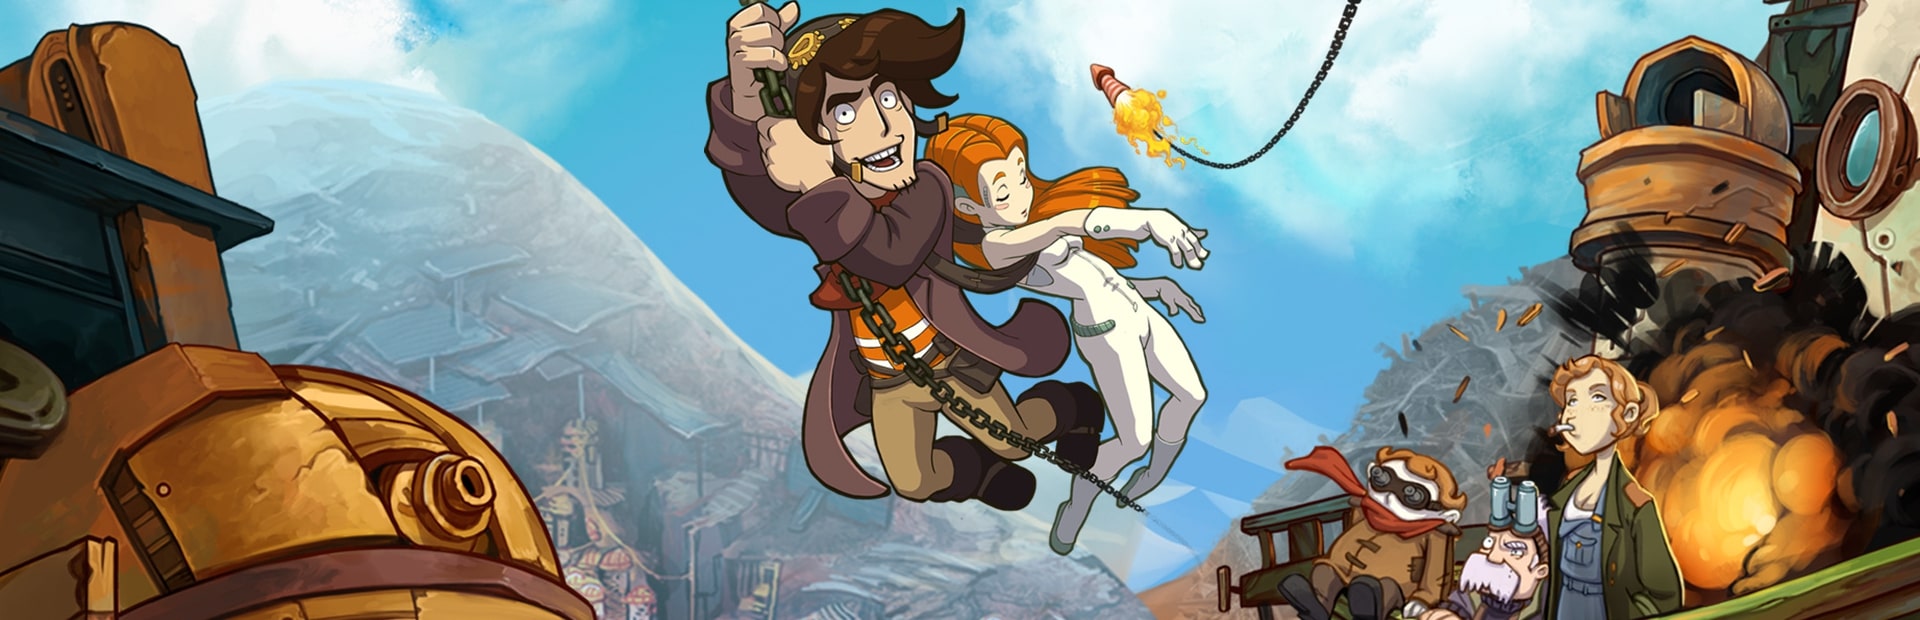 Deponia Review: A Whimsical Adventure on Windows, Mac, and Linux